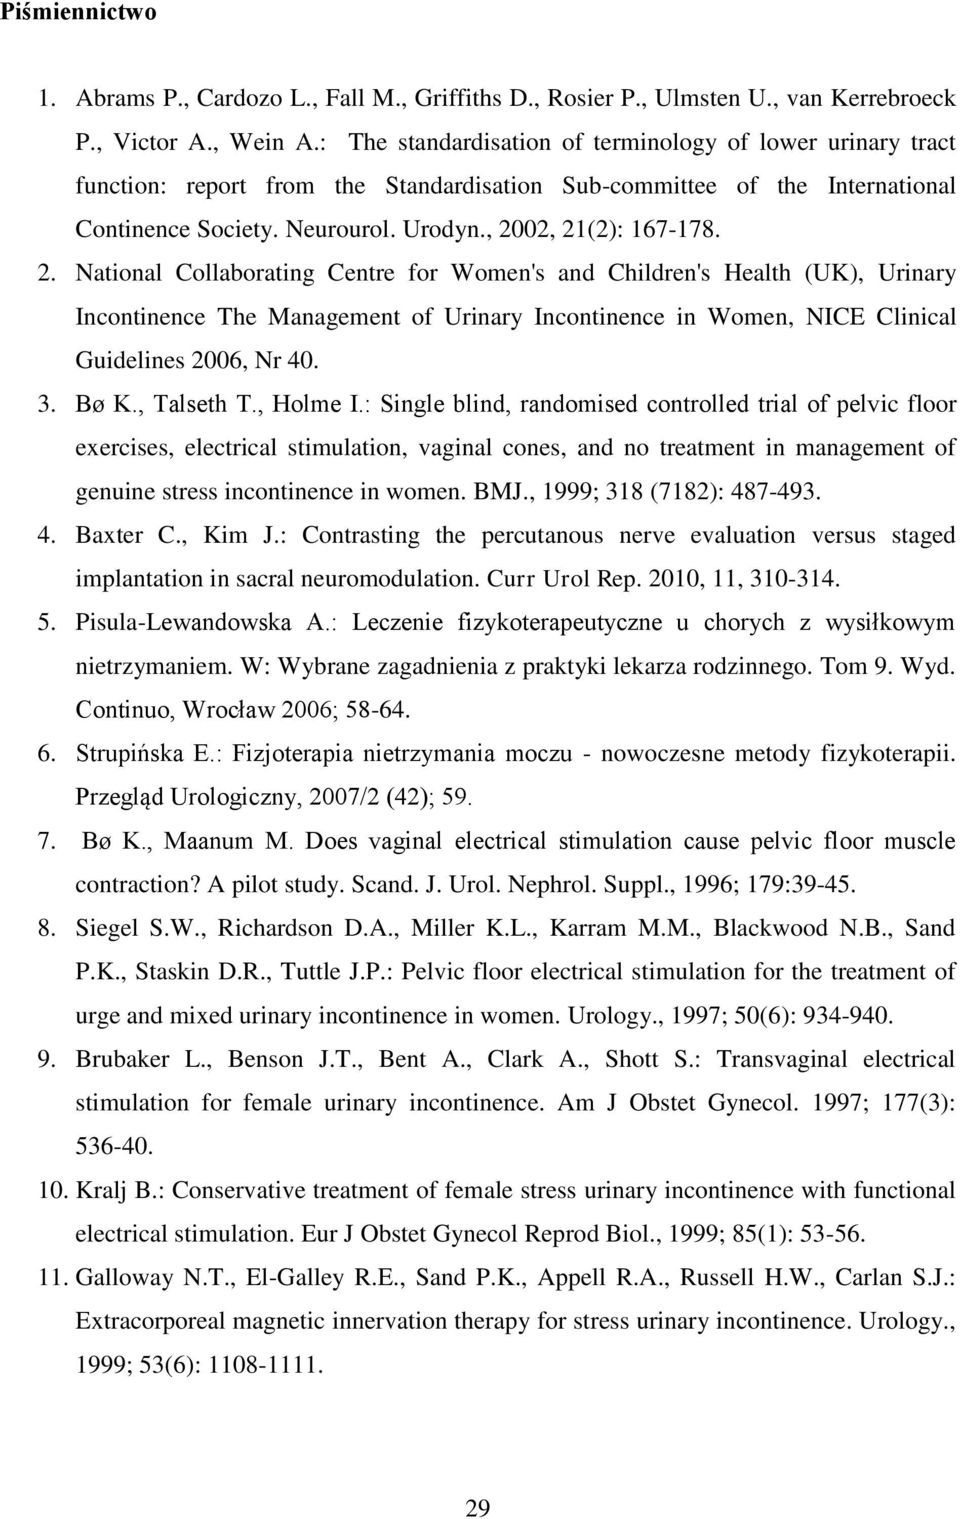 2. National Collaborating Centre for Women's and Children's Health (UK), Urinary Incontinence The Management of Urinary Incontinence in Women, NICE Clinical Guidelines 2006, Nr 40. 3. Bø K.